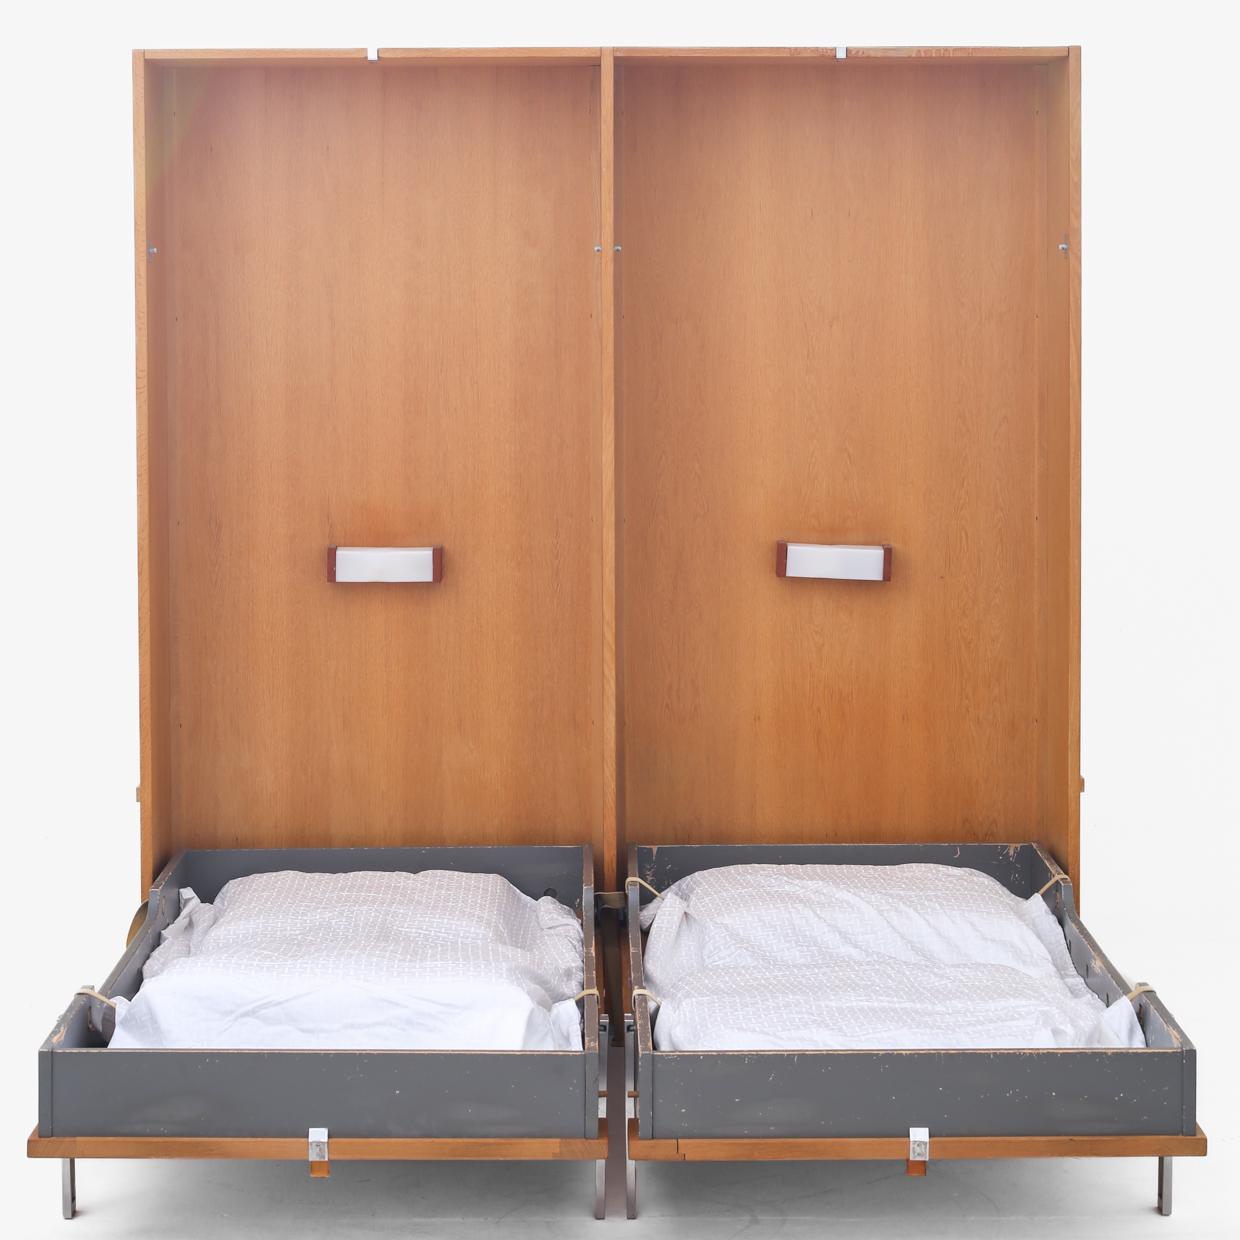 RY 100 - Freestanding cabinet bed (double bed) in oak with fronts in patinated cane with handles in patinated core leather. Hans J. Wegner / Ry Møbler